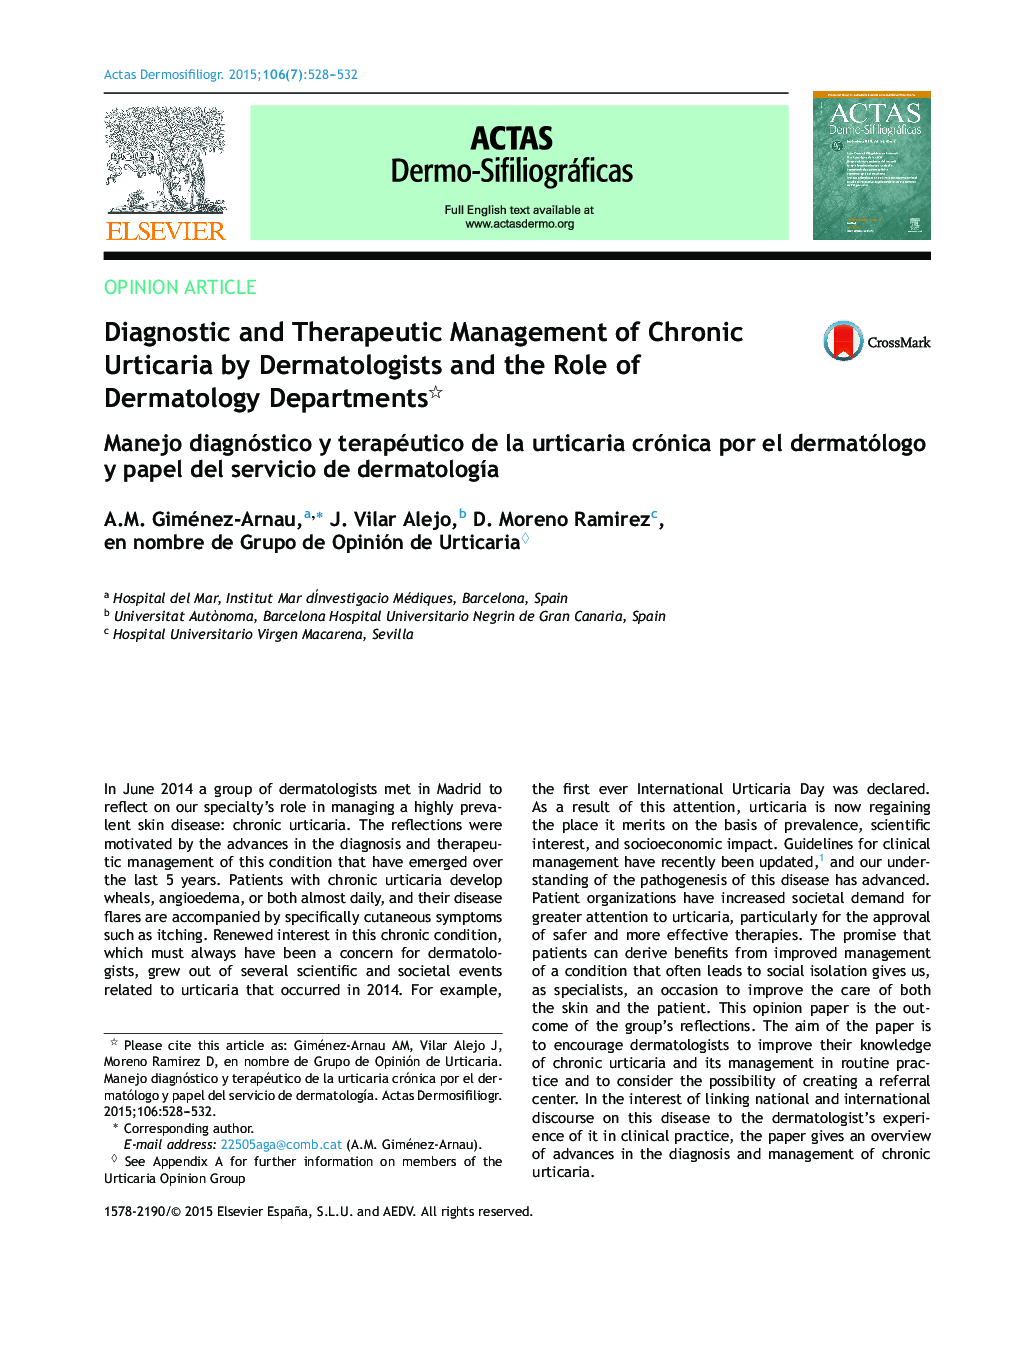 Diagnostic and Therapeutic Management of Chronic Urticaria by Dermatologists and the Role of Dermatology Departments